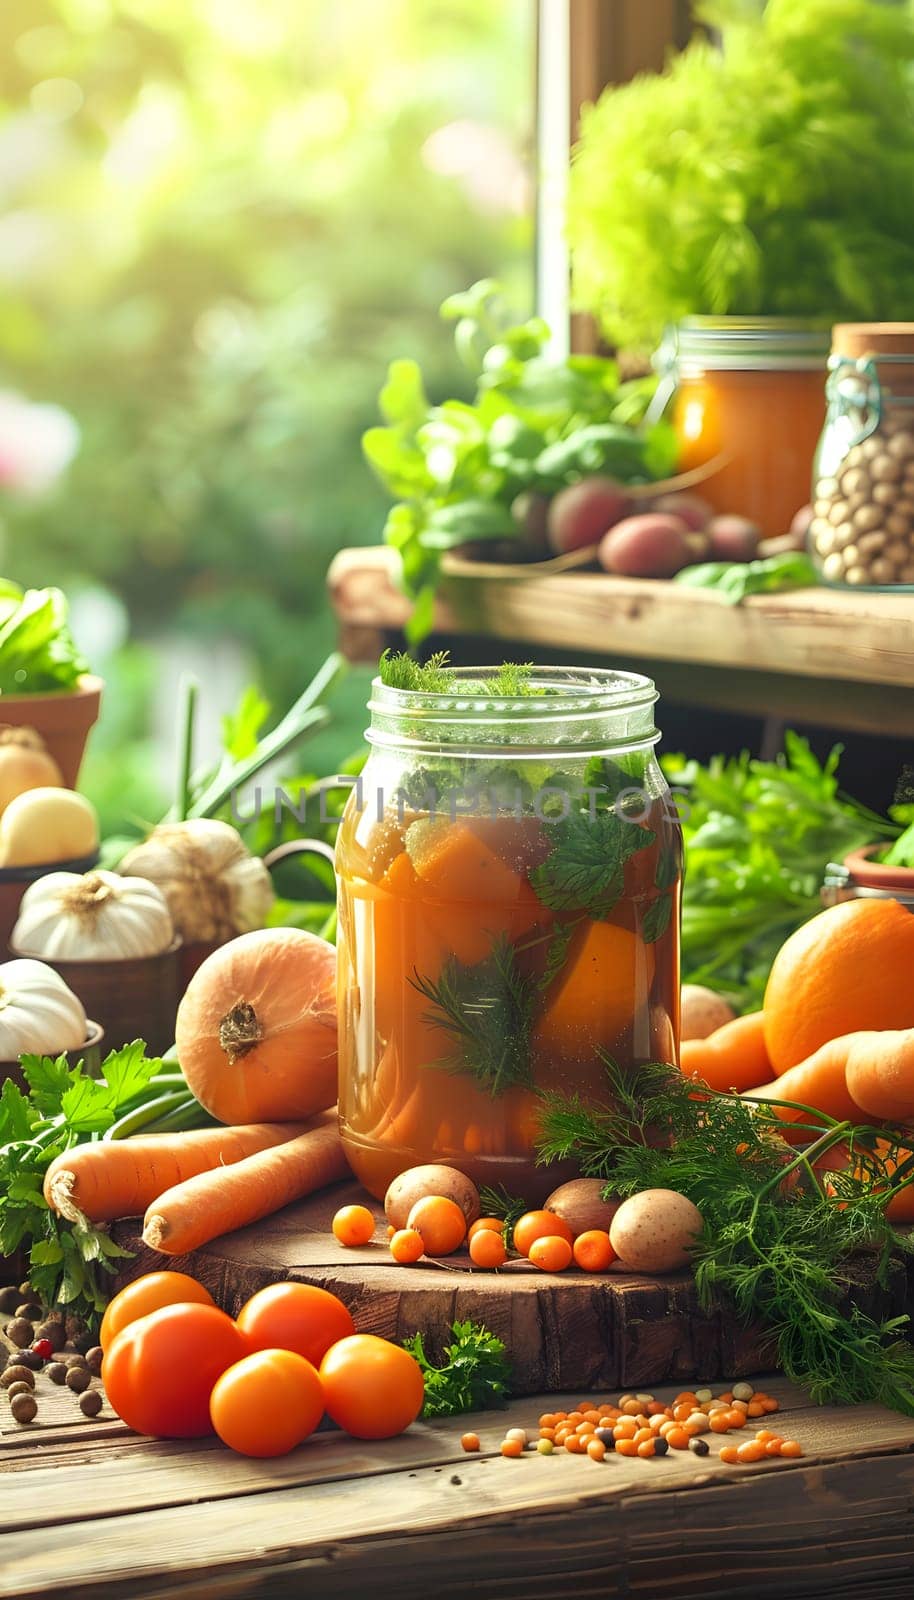 A jar of pickled carrots sits among various vegetables on a wooden table, showcasing the vibrant colors of natural foods such as orange carrots and green plants